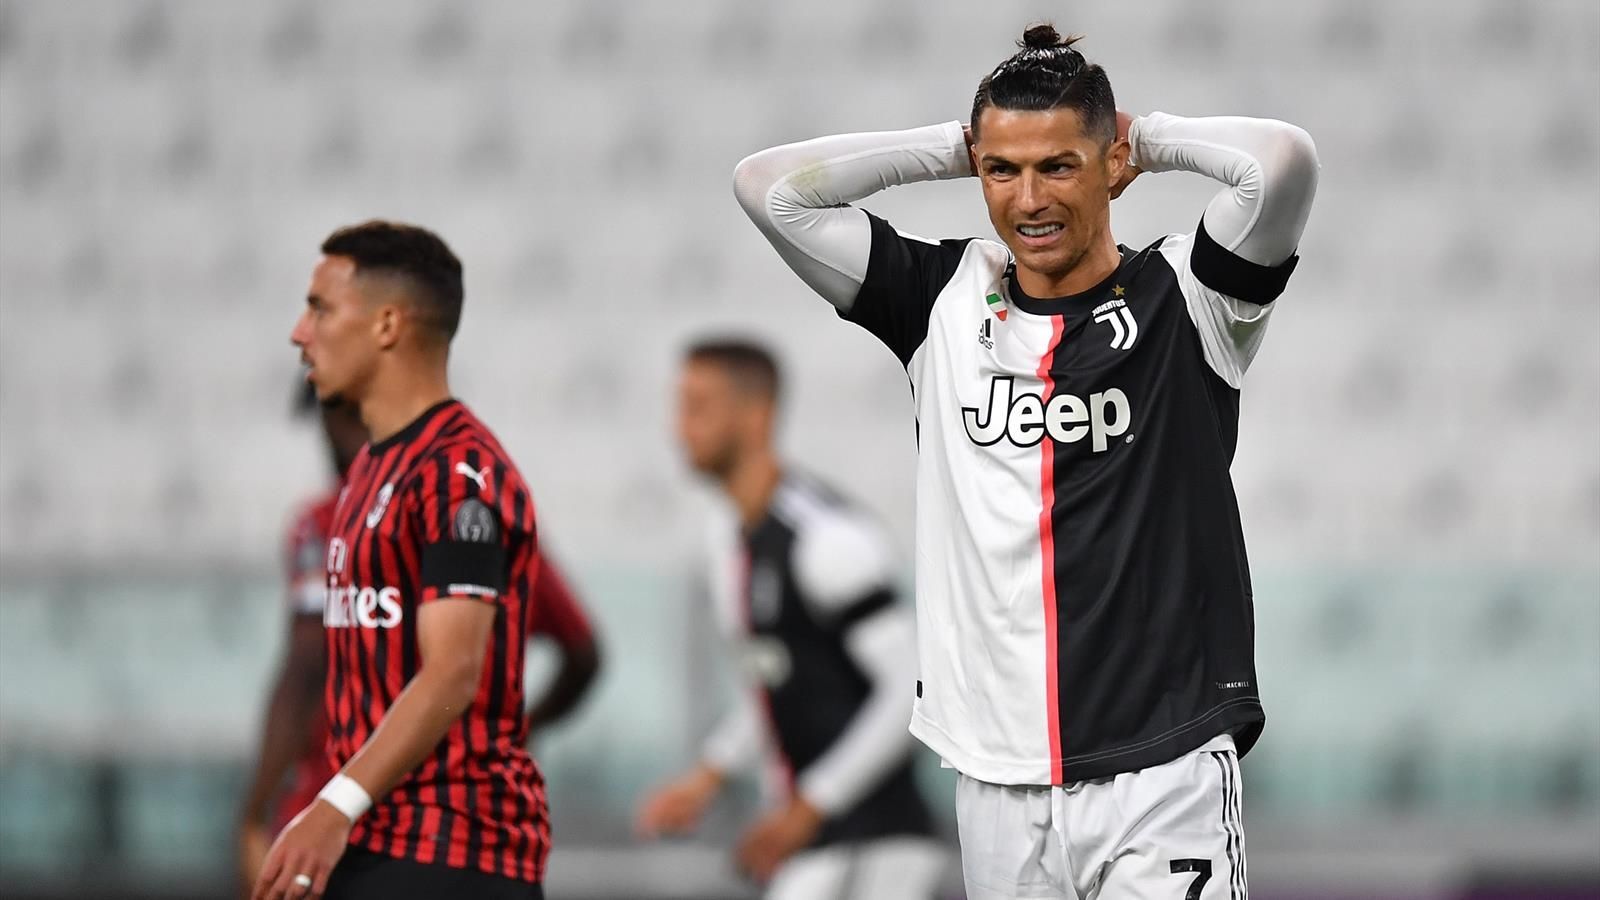 Juventus and Milan Players Unite against Racism in Coppa Italia Match Using Shirts